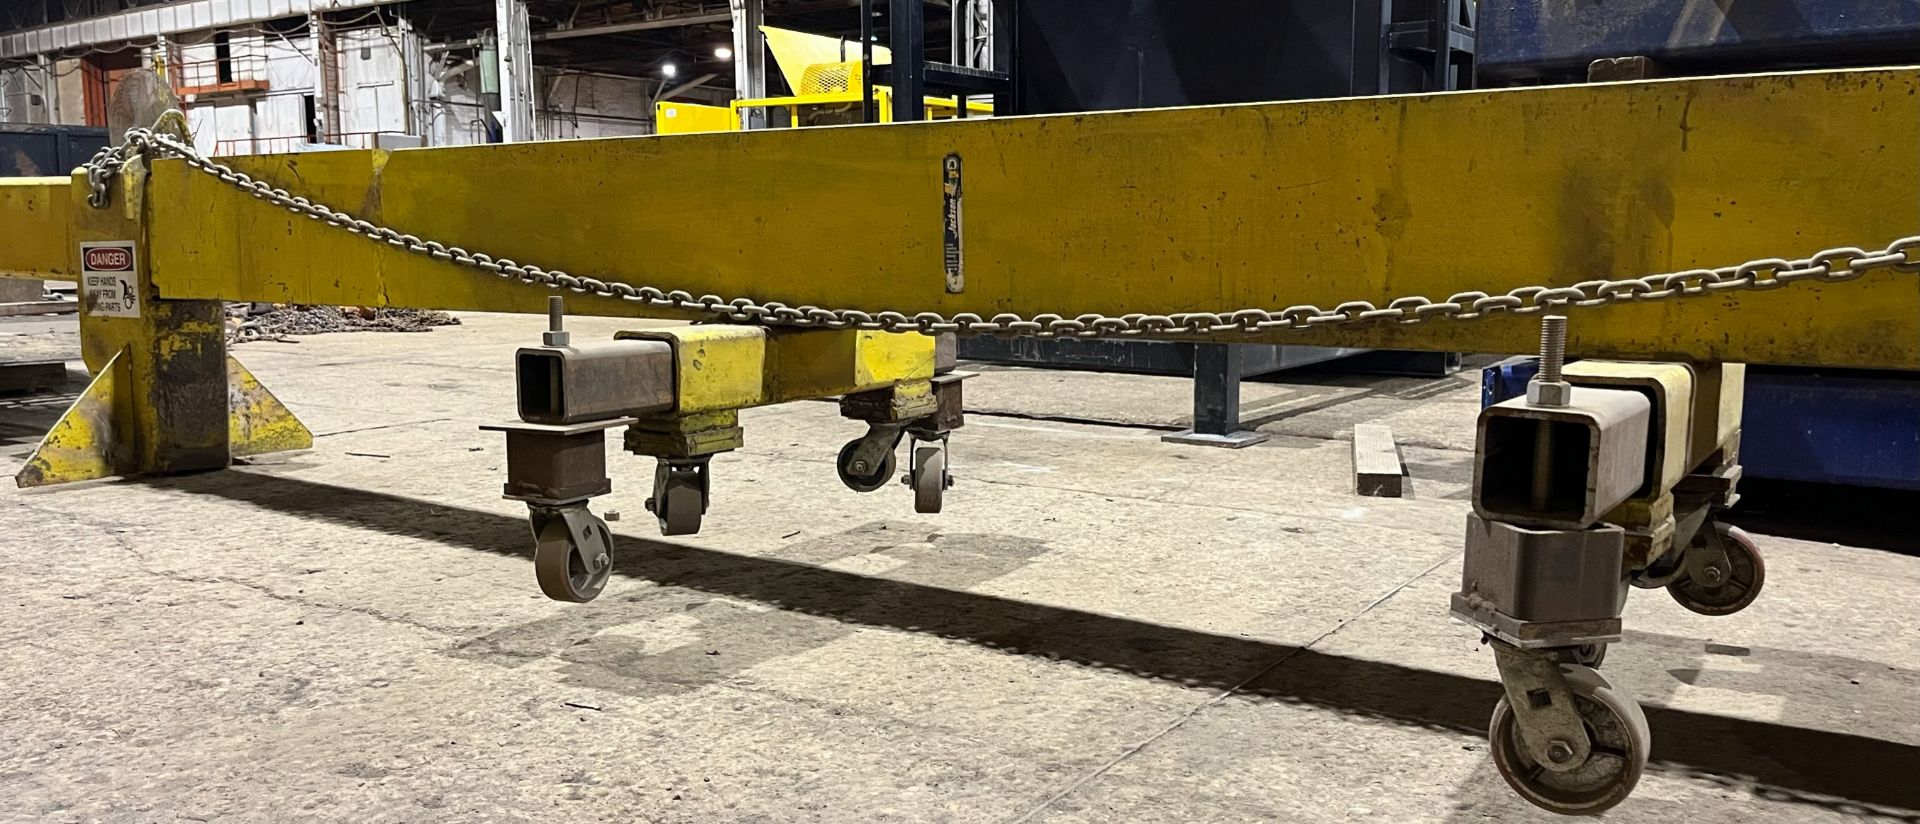 HYDRAULIC GIRDER SQUEEZE JIG [RIGGING FEES FOR LOT #189A - $500 USD PLUS APPLICABLE TAXES] - Image 9 of 11